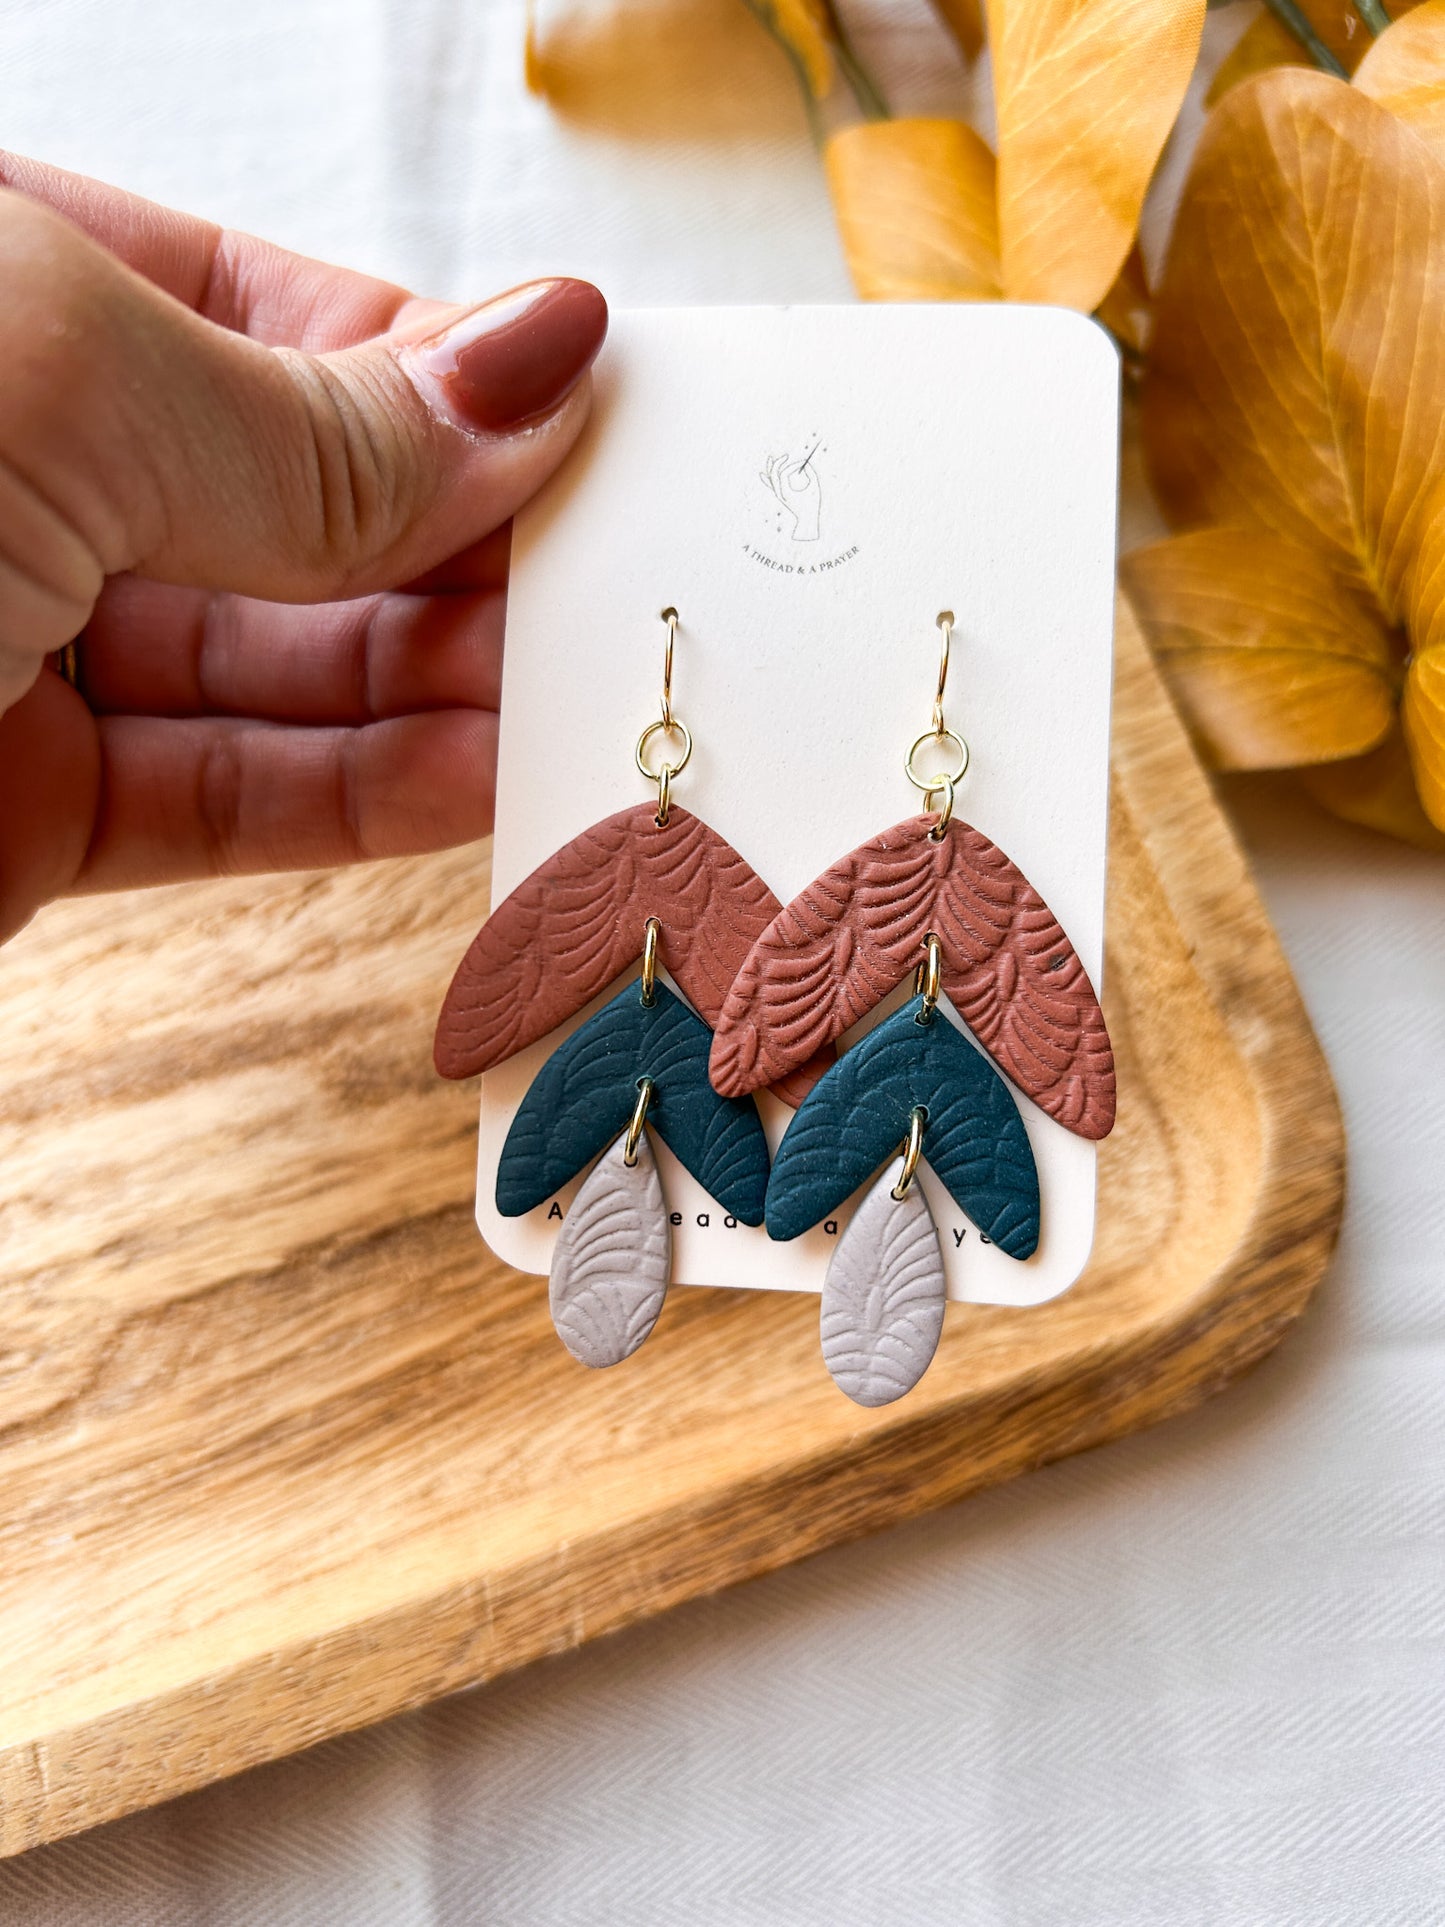 Love that Texture Autumn Tiered Clay Earrings | Fall Fashion | Autumn Earrings | Statement Earrings | Lightweight